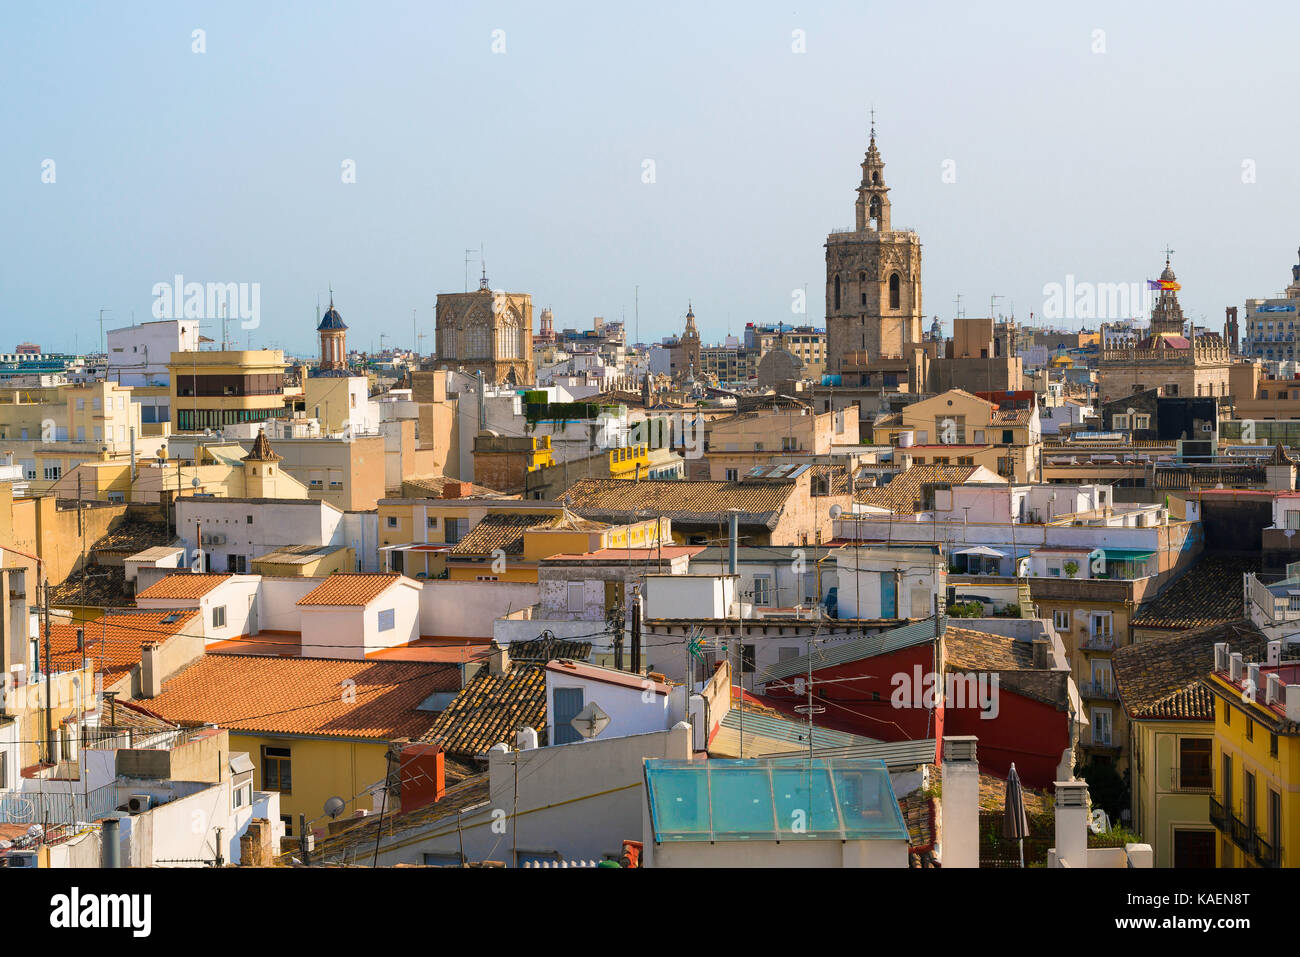 Valencia city view, view over the rooftops of the old town Barrio del Carmen area of Valencia with the cathedral towers visible on the skyline, Spain. Stock Photo